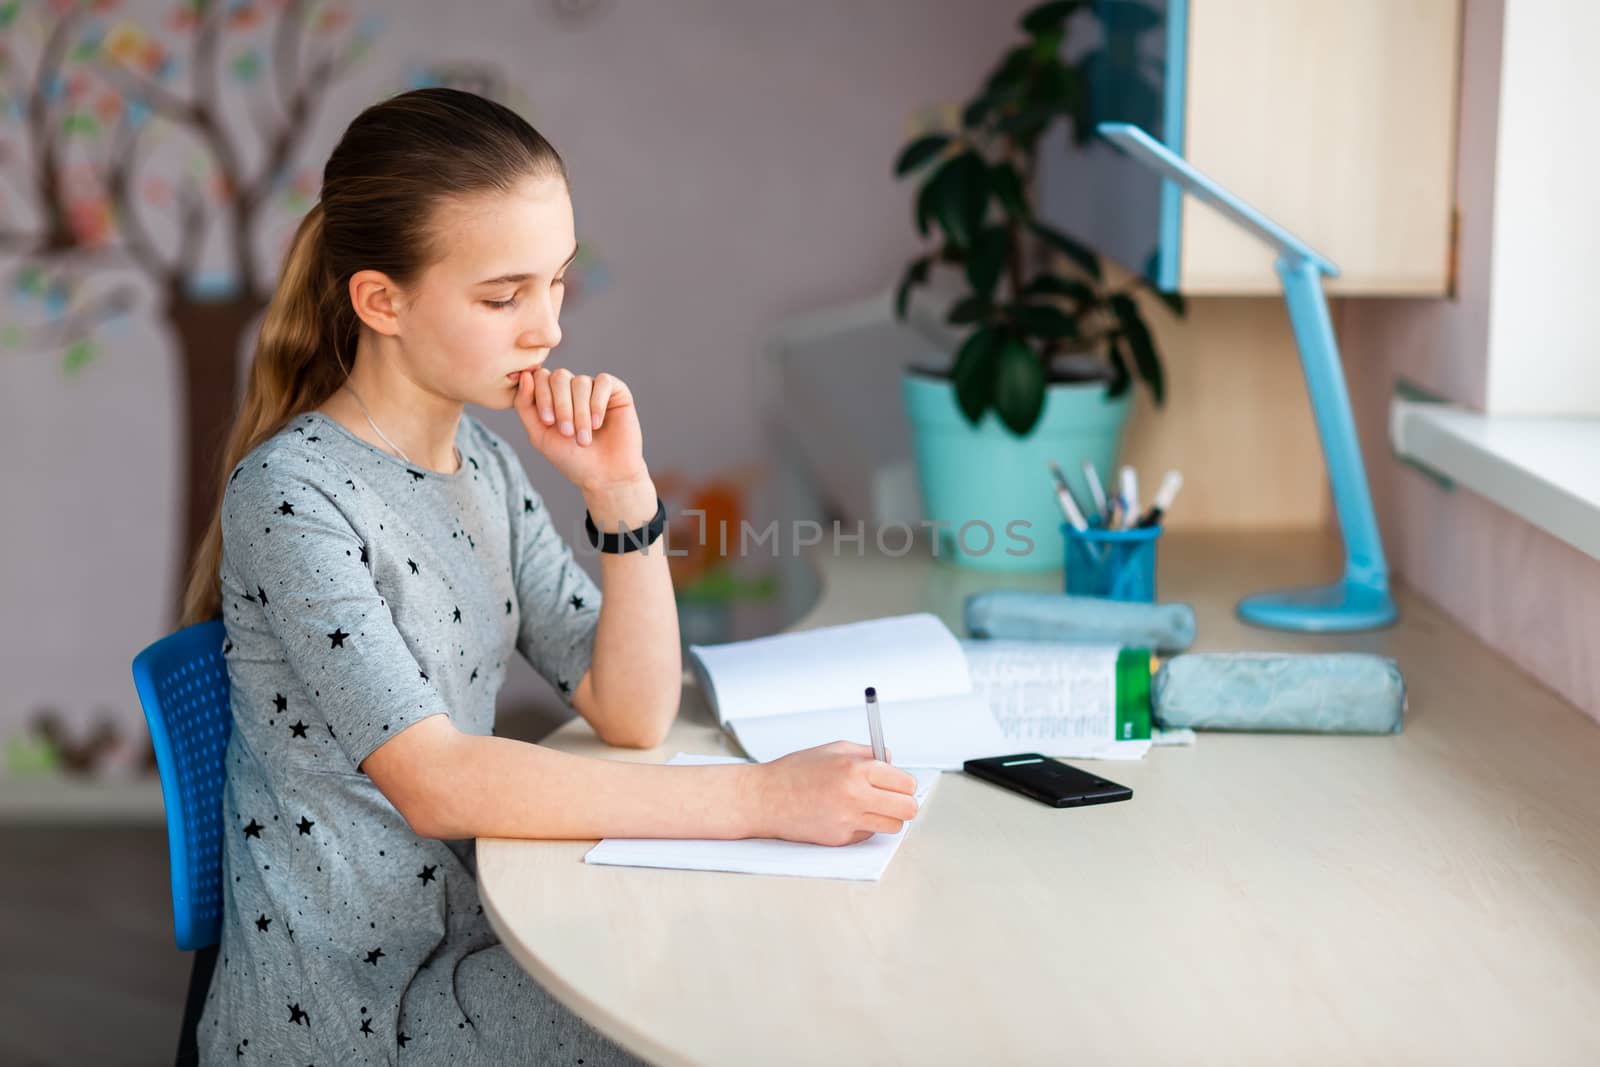 Beautiful young school girl working at home in her room with class notes and mobile phone and studying. Distance education and learning concept during quarantine